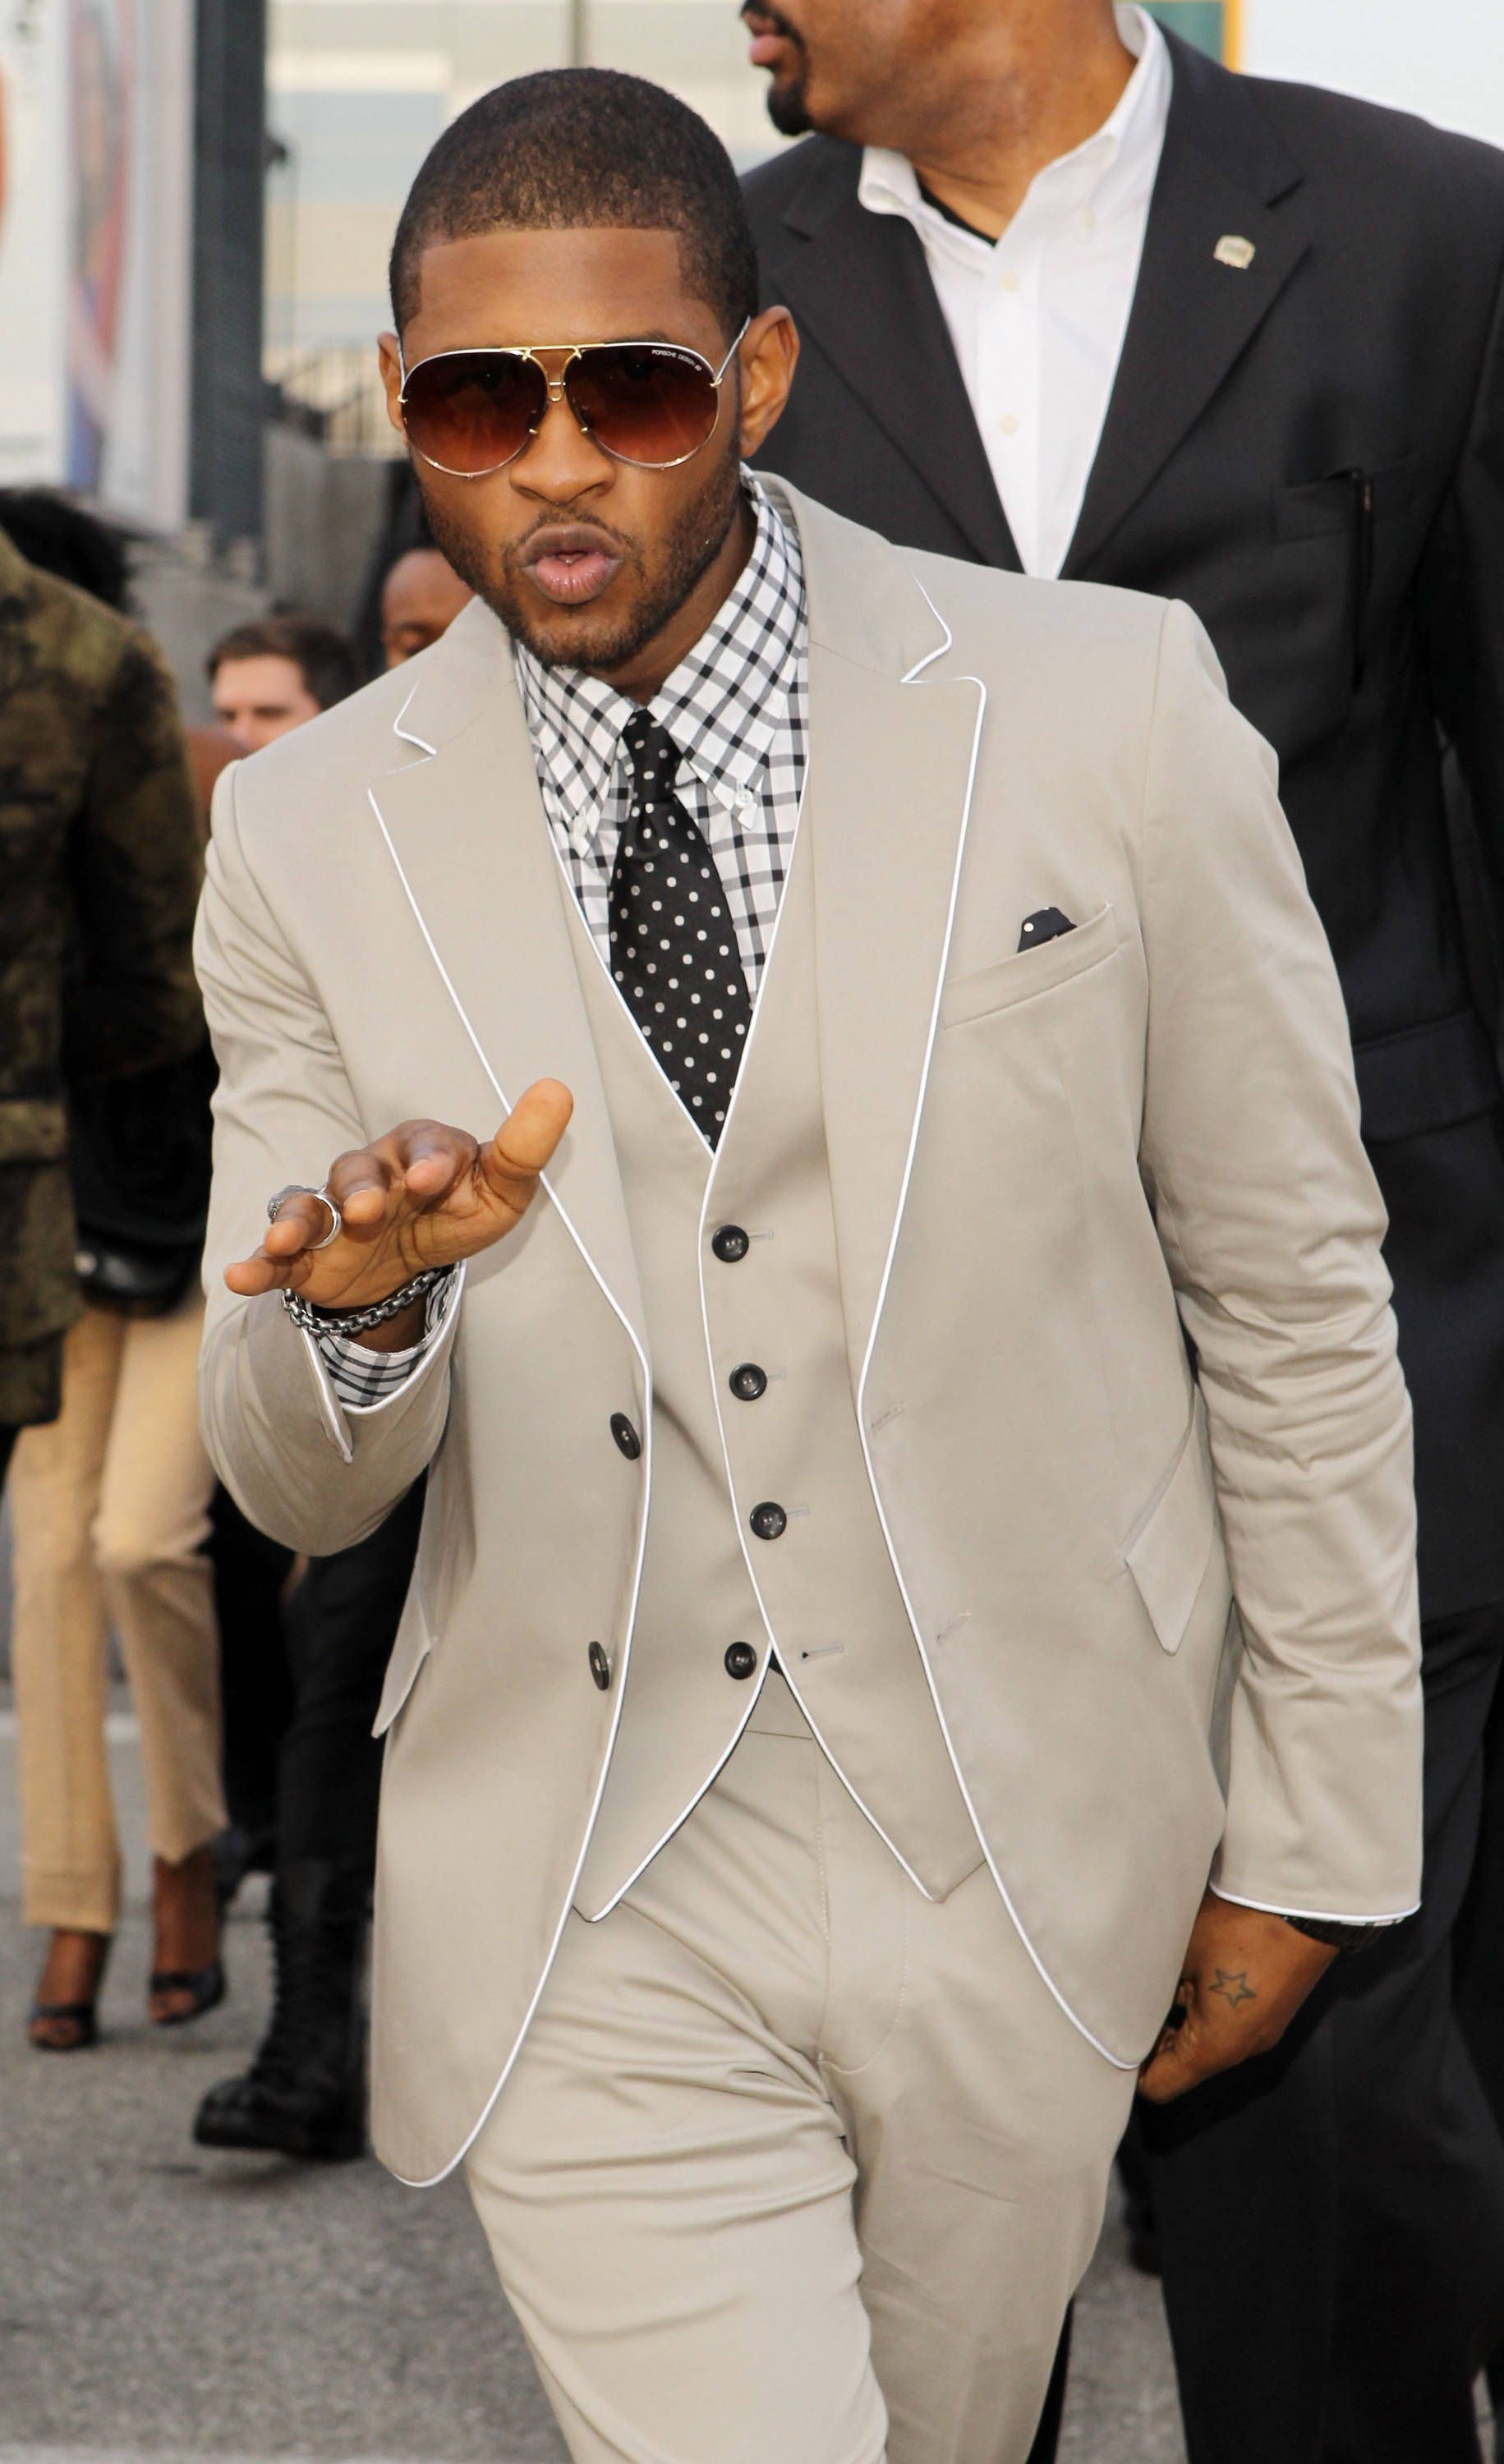 Usher – Love the Bone colored suit with white piping paired with a black and whi